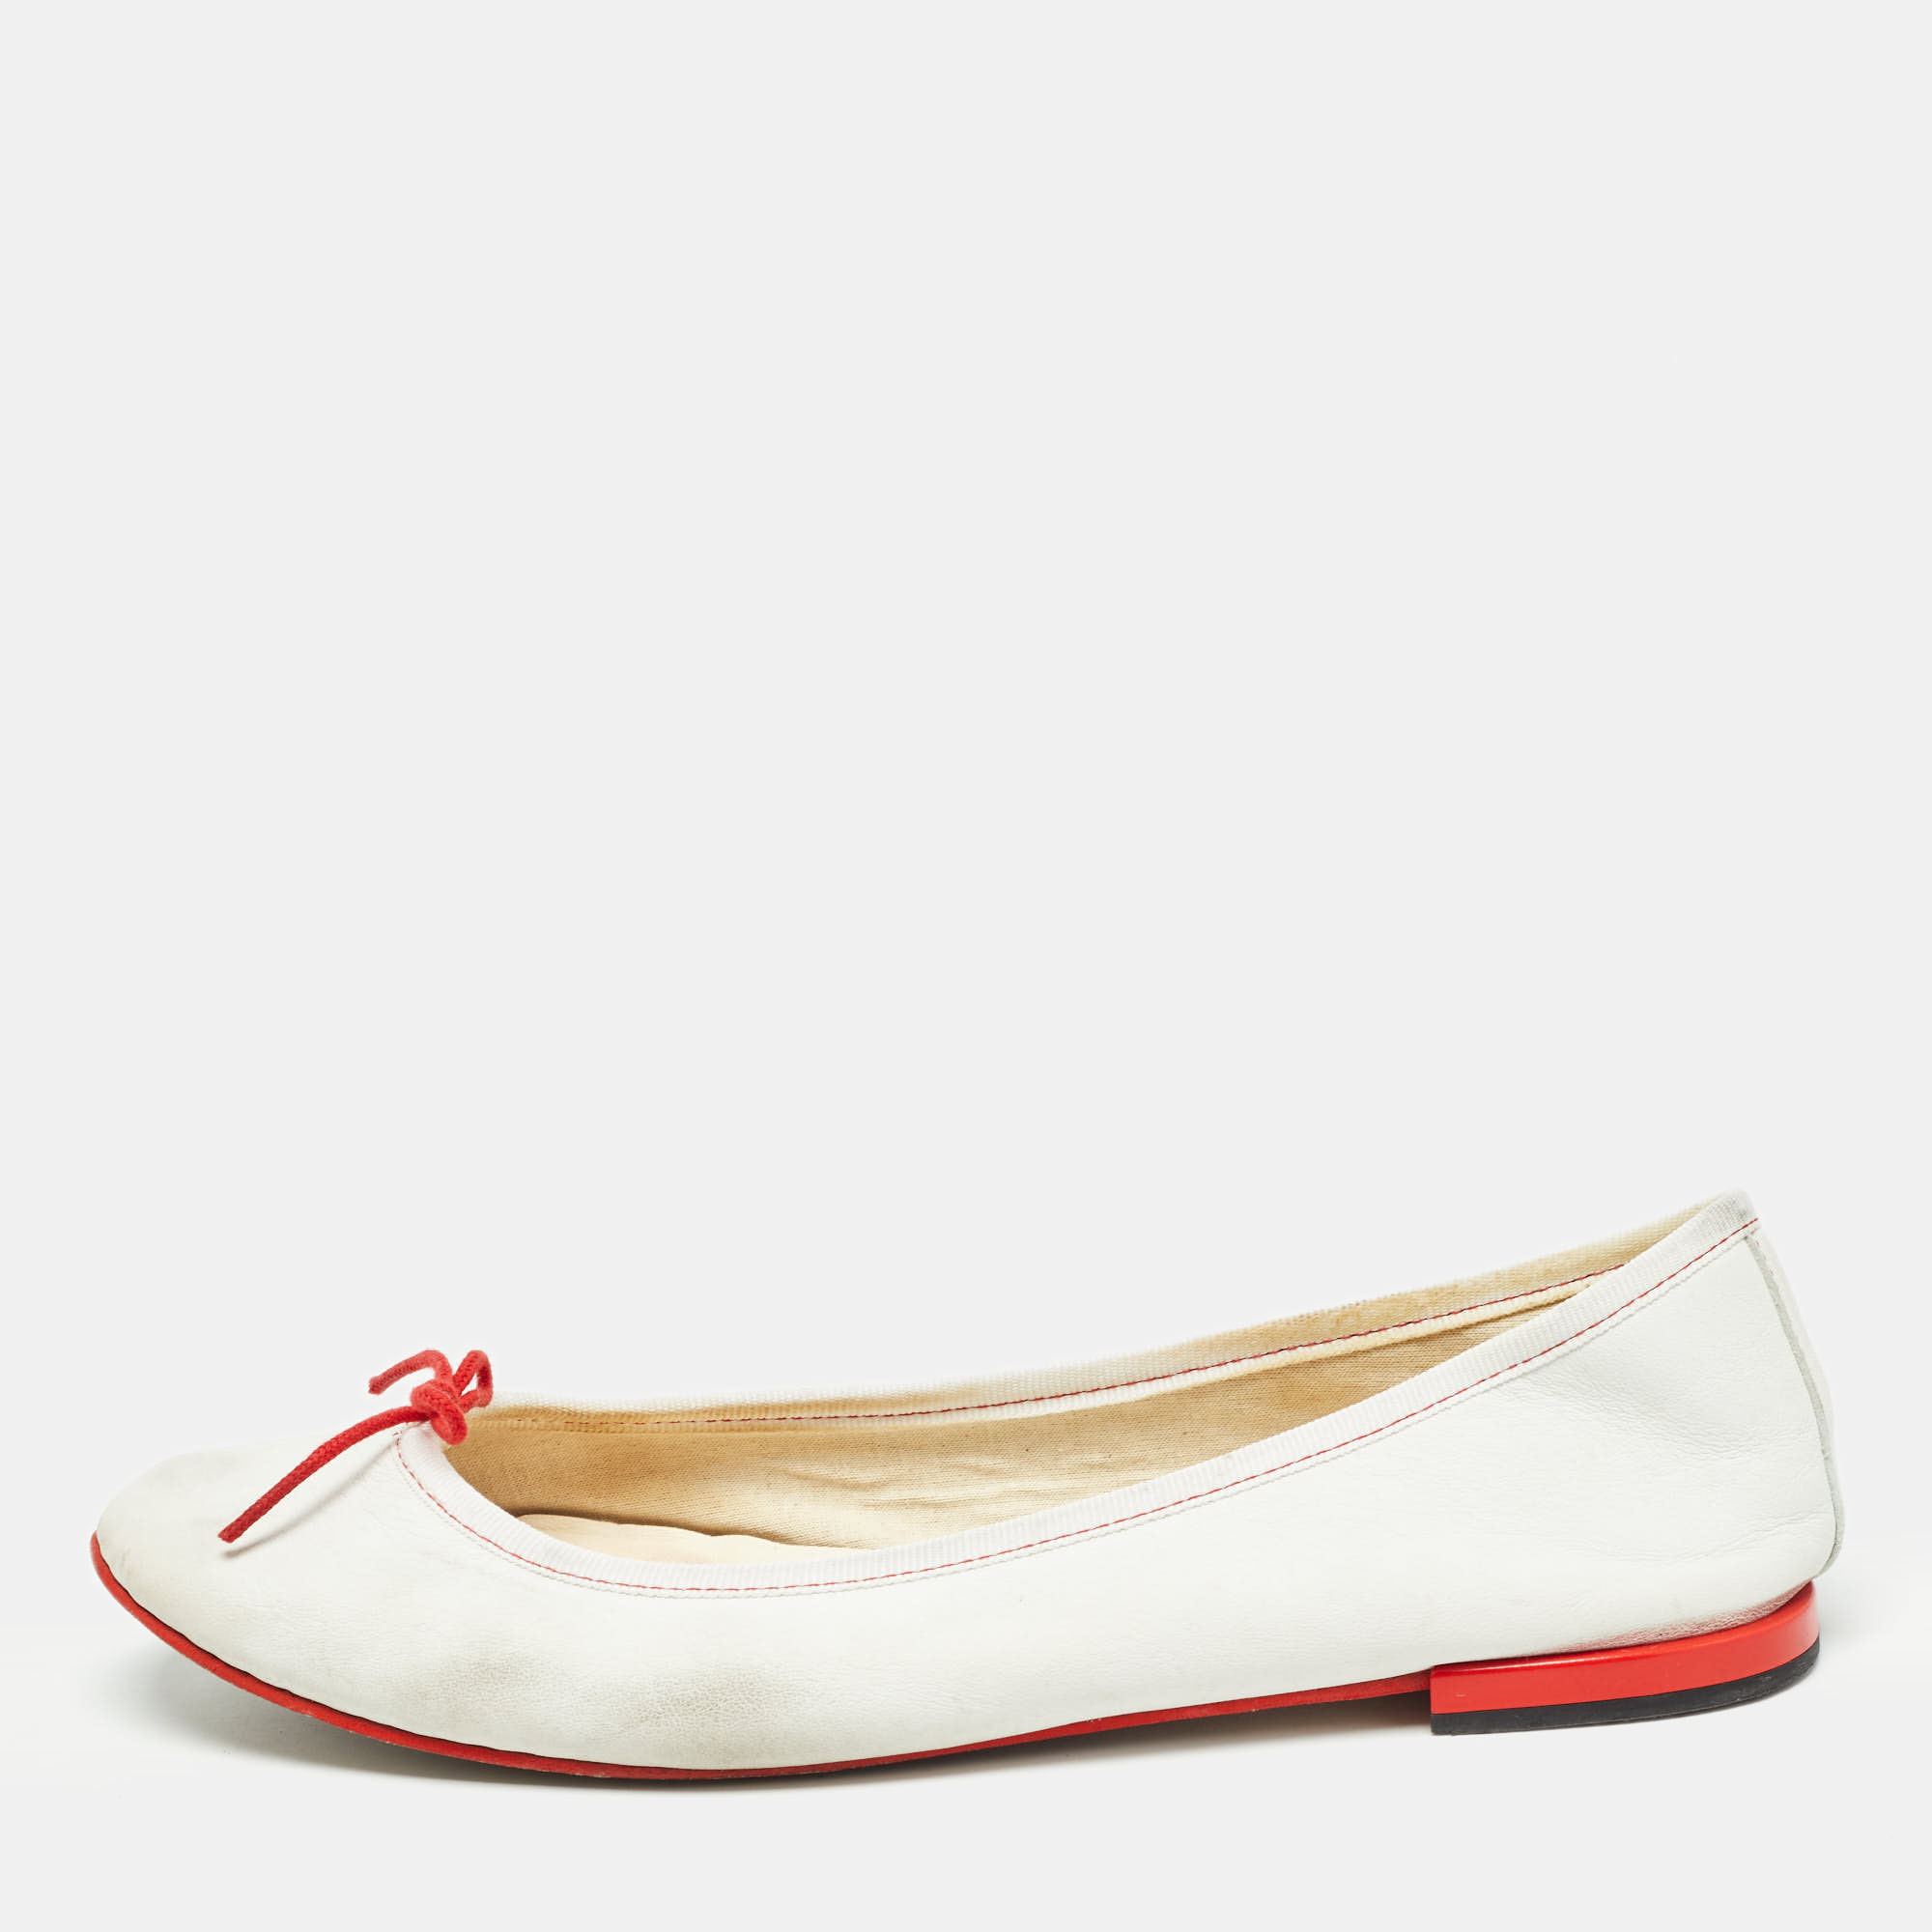 Repetto white leather bow ballet flats size 39